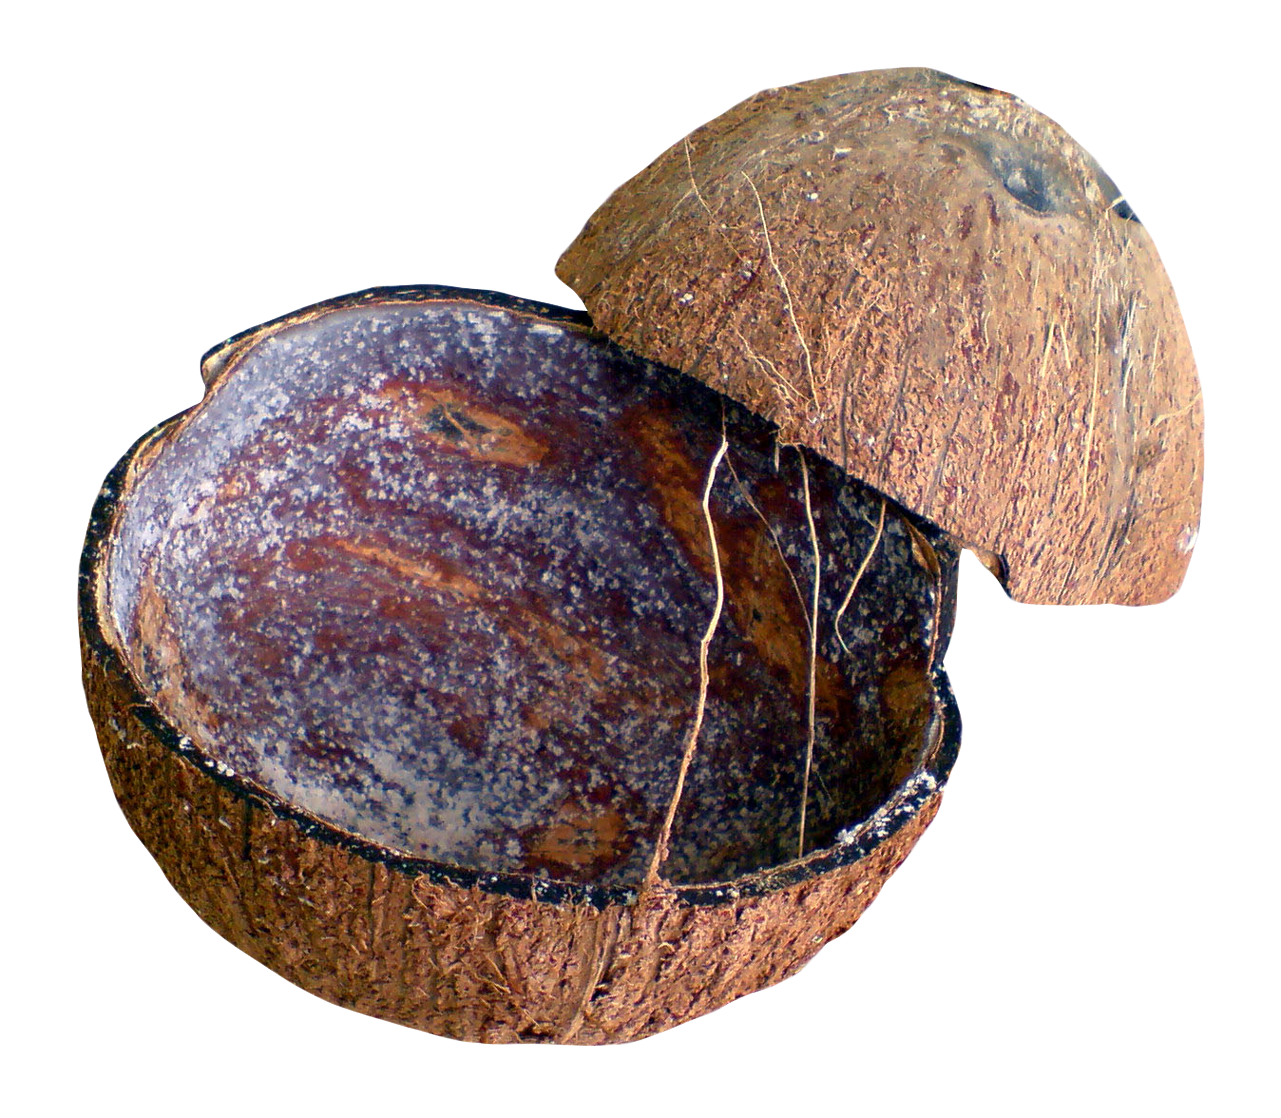 Shell png image purepng. Coconut clipart whole